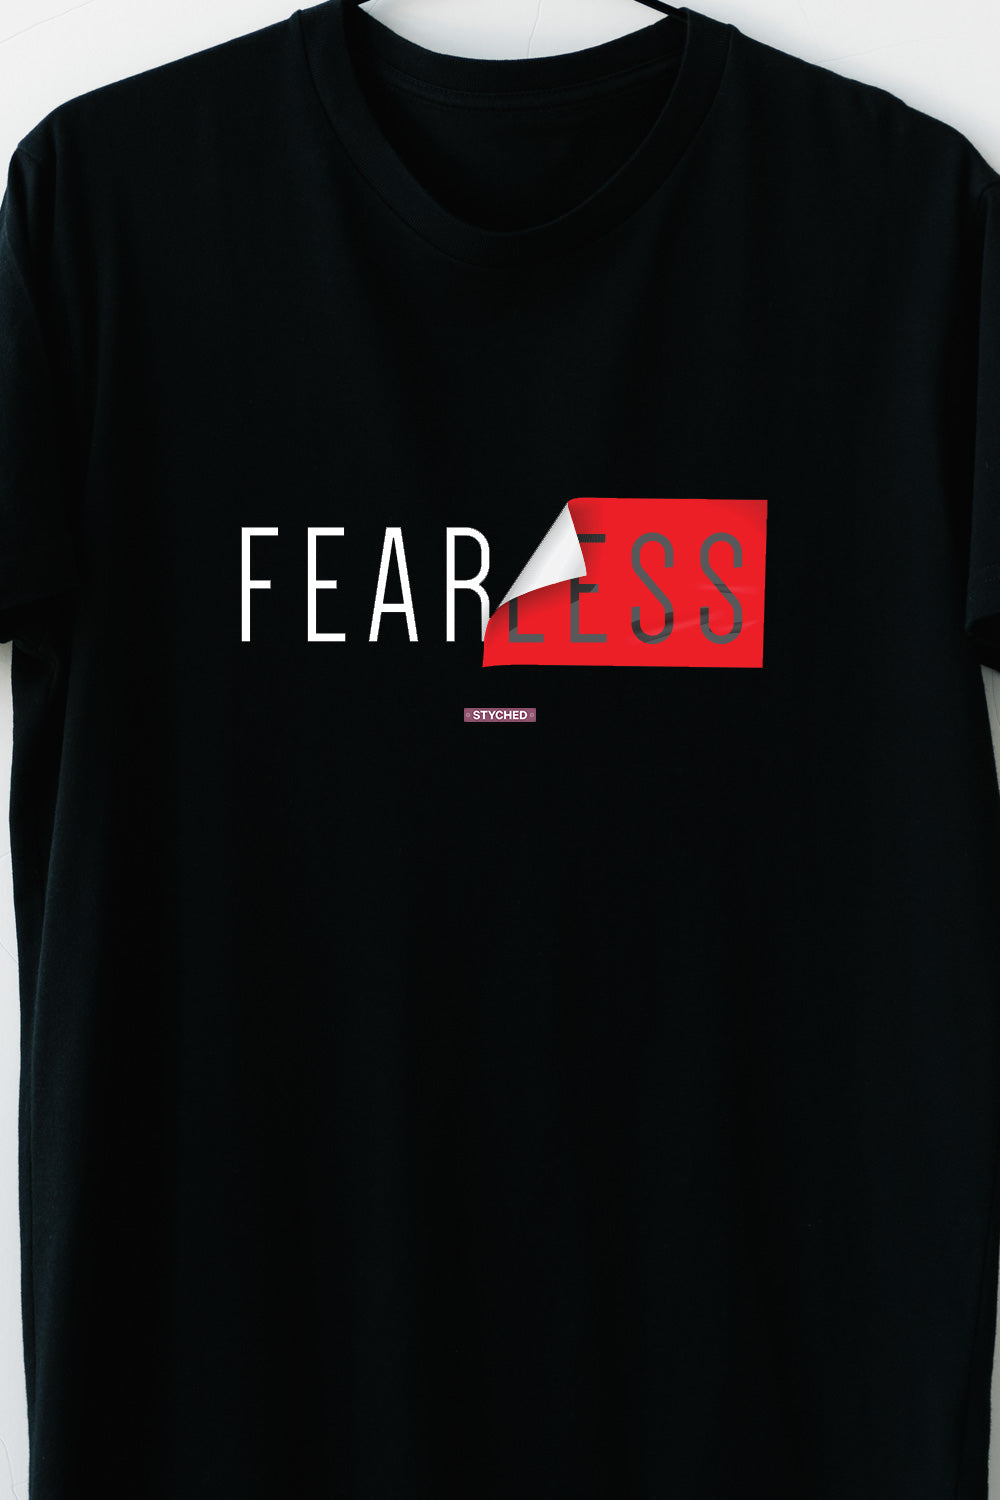 Fearless - Folded paper effect block printed Casual Black T Shirt